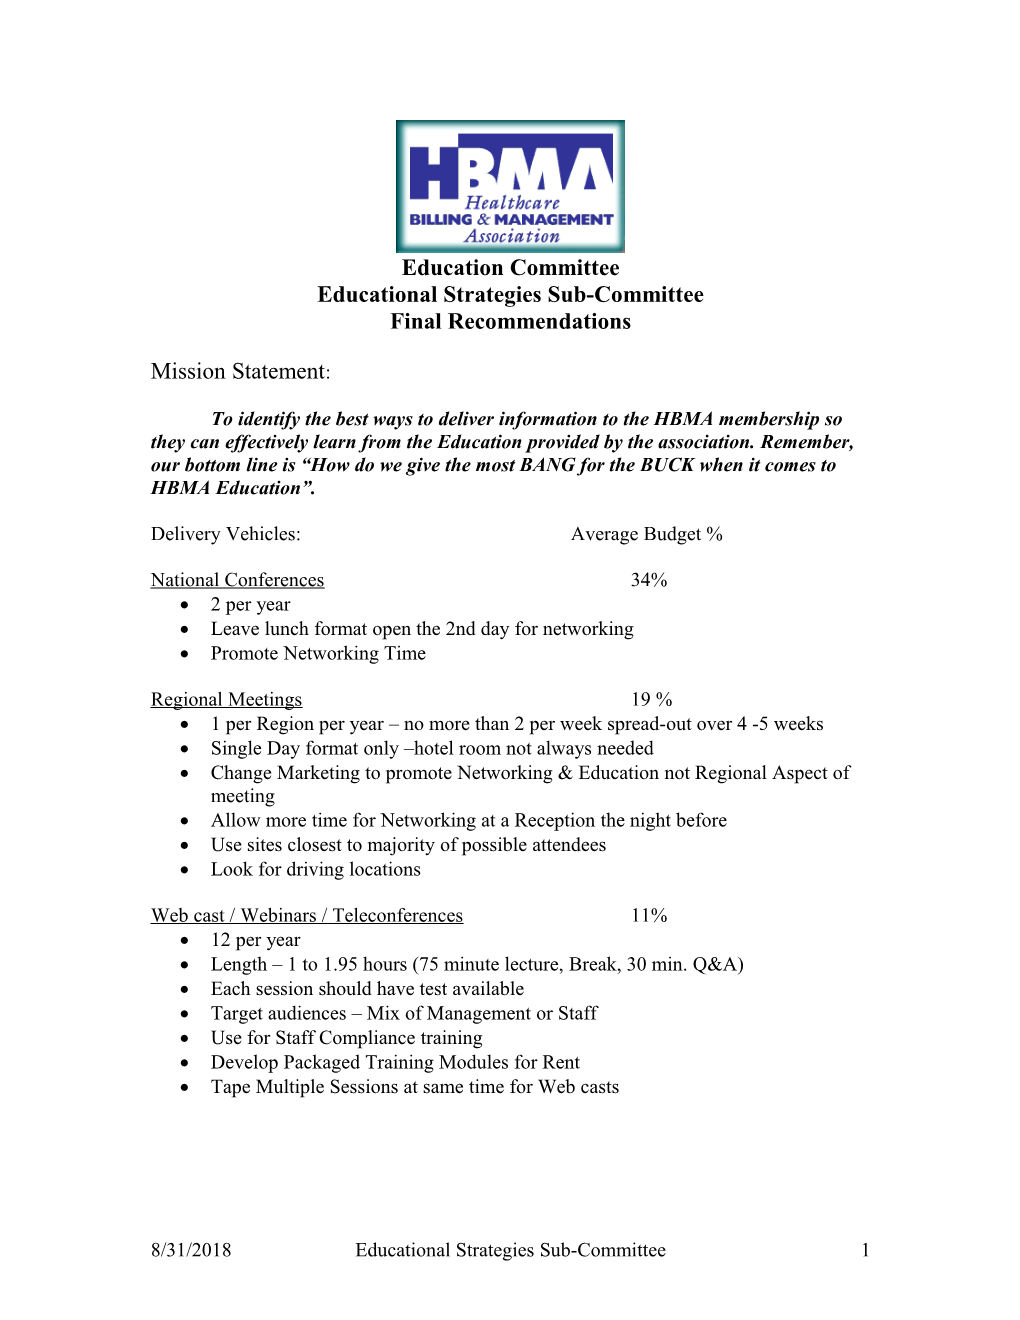 HBMA Education Committee